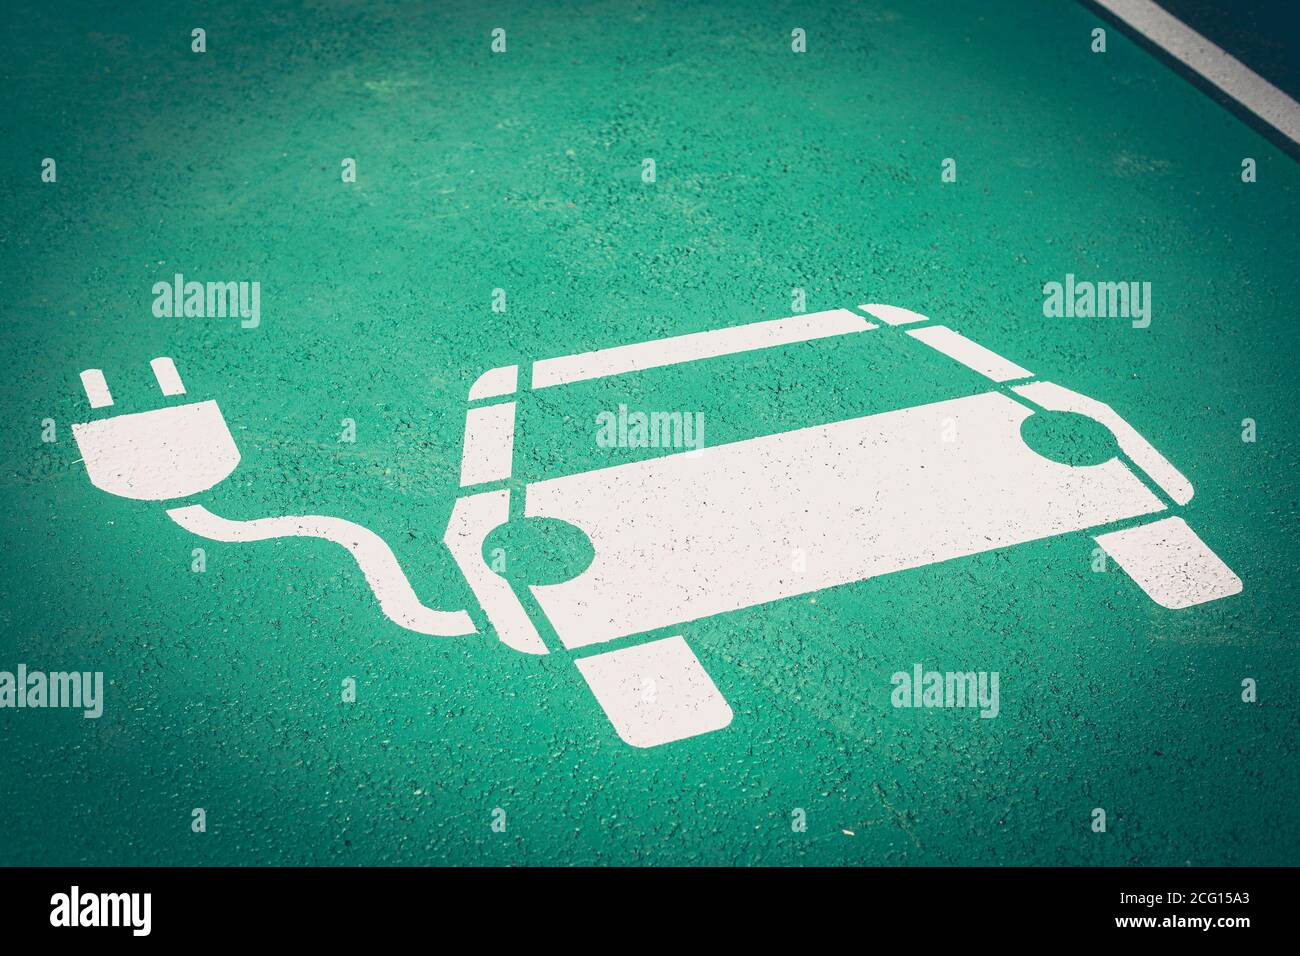 Parking symbol on the street for electric cars being charged Stock Photo